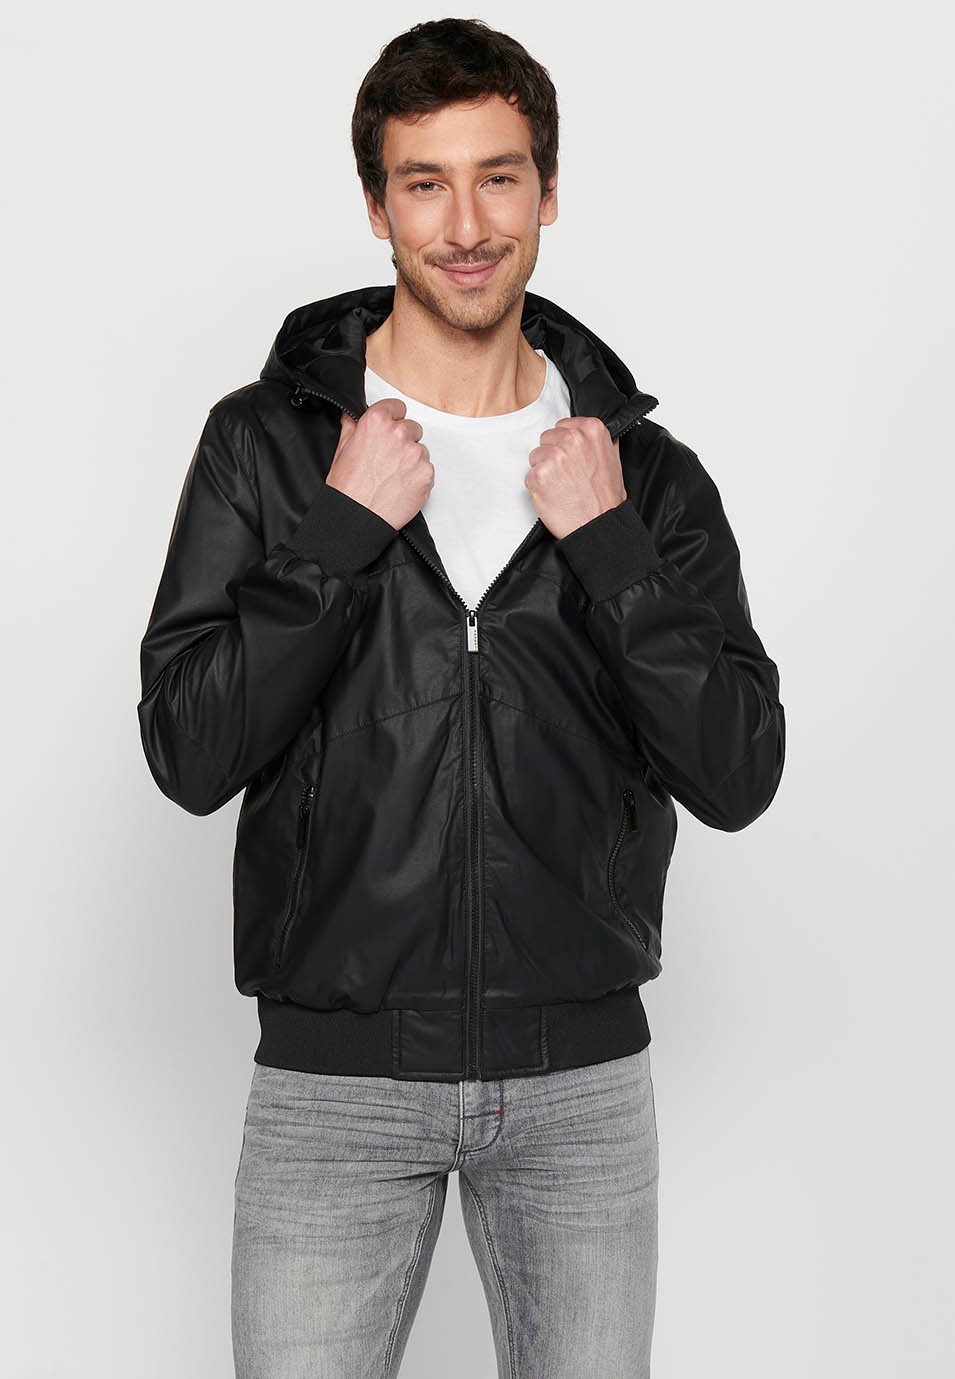 Leather-effect jacket with front zipper closure and hooded collar in black for Men 7